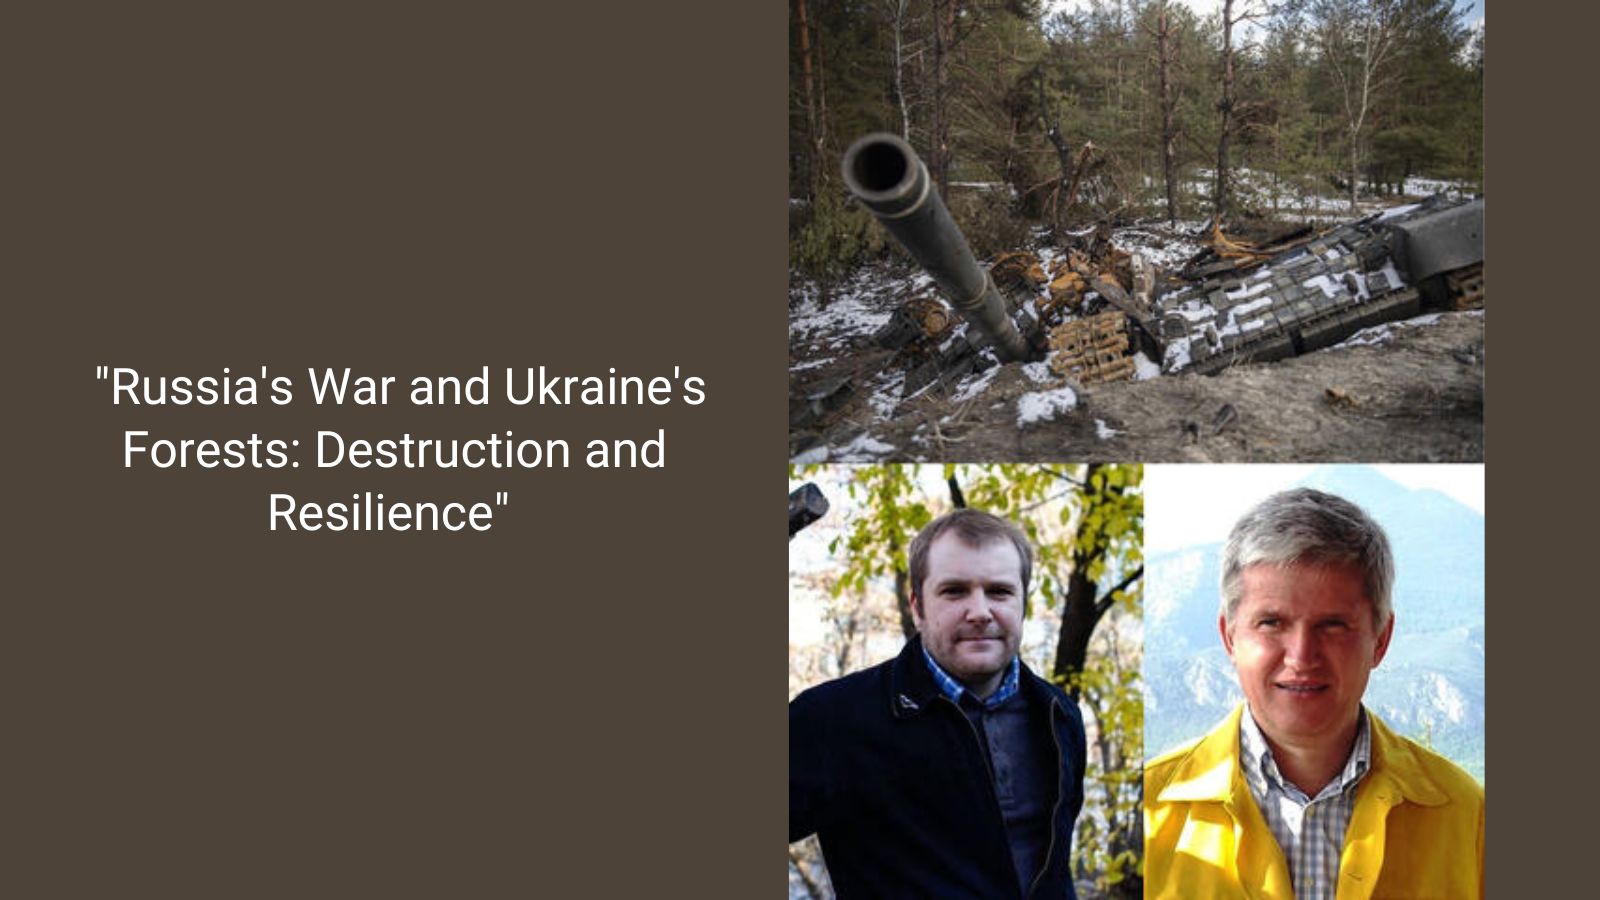 Russia's War and Ukraine's Forests: Destruction and Resilience